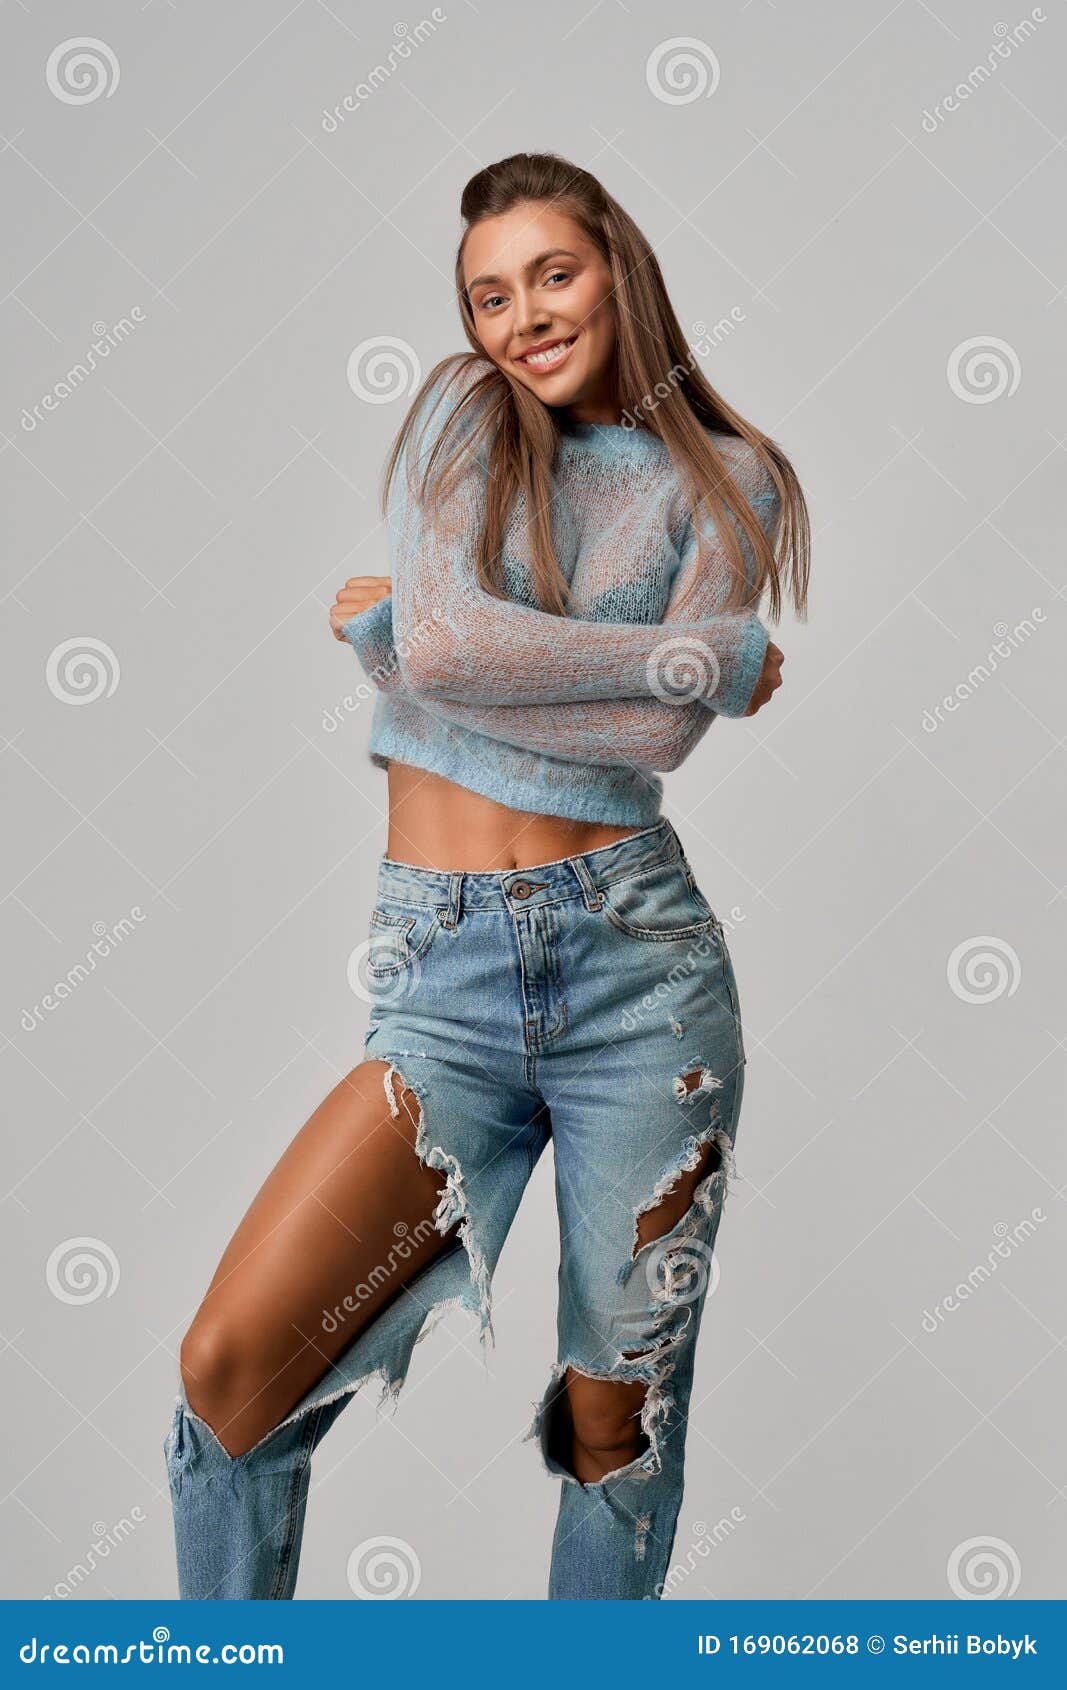 girls ripped jeans